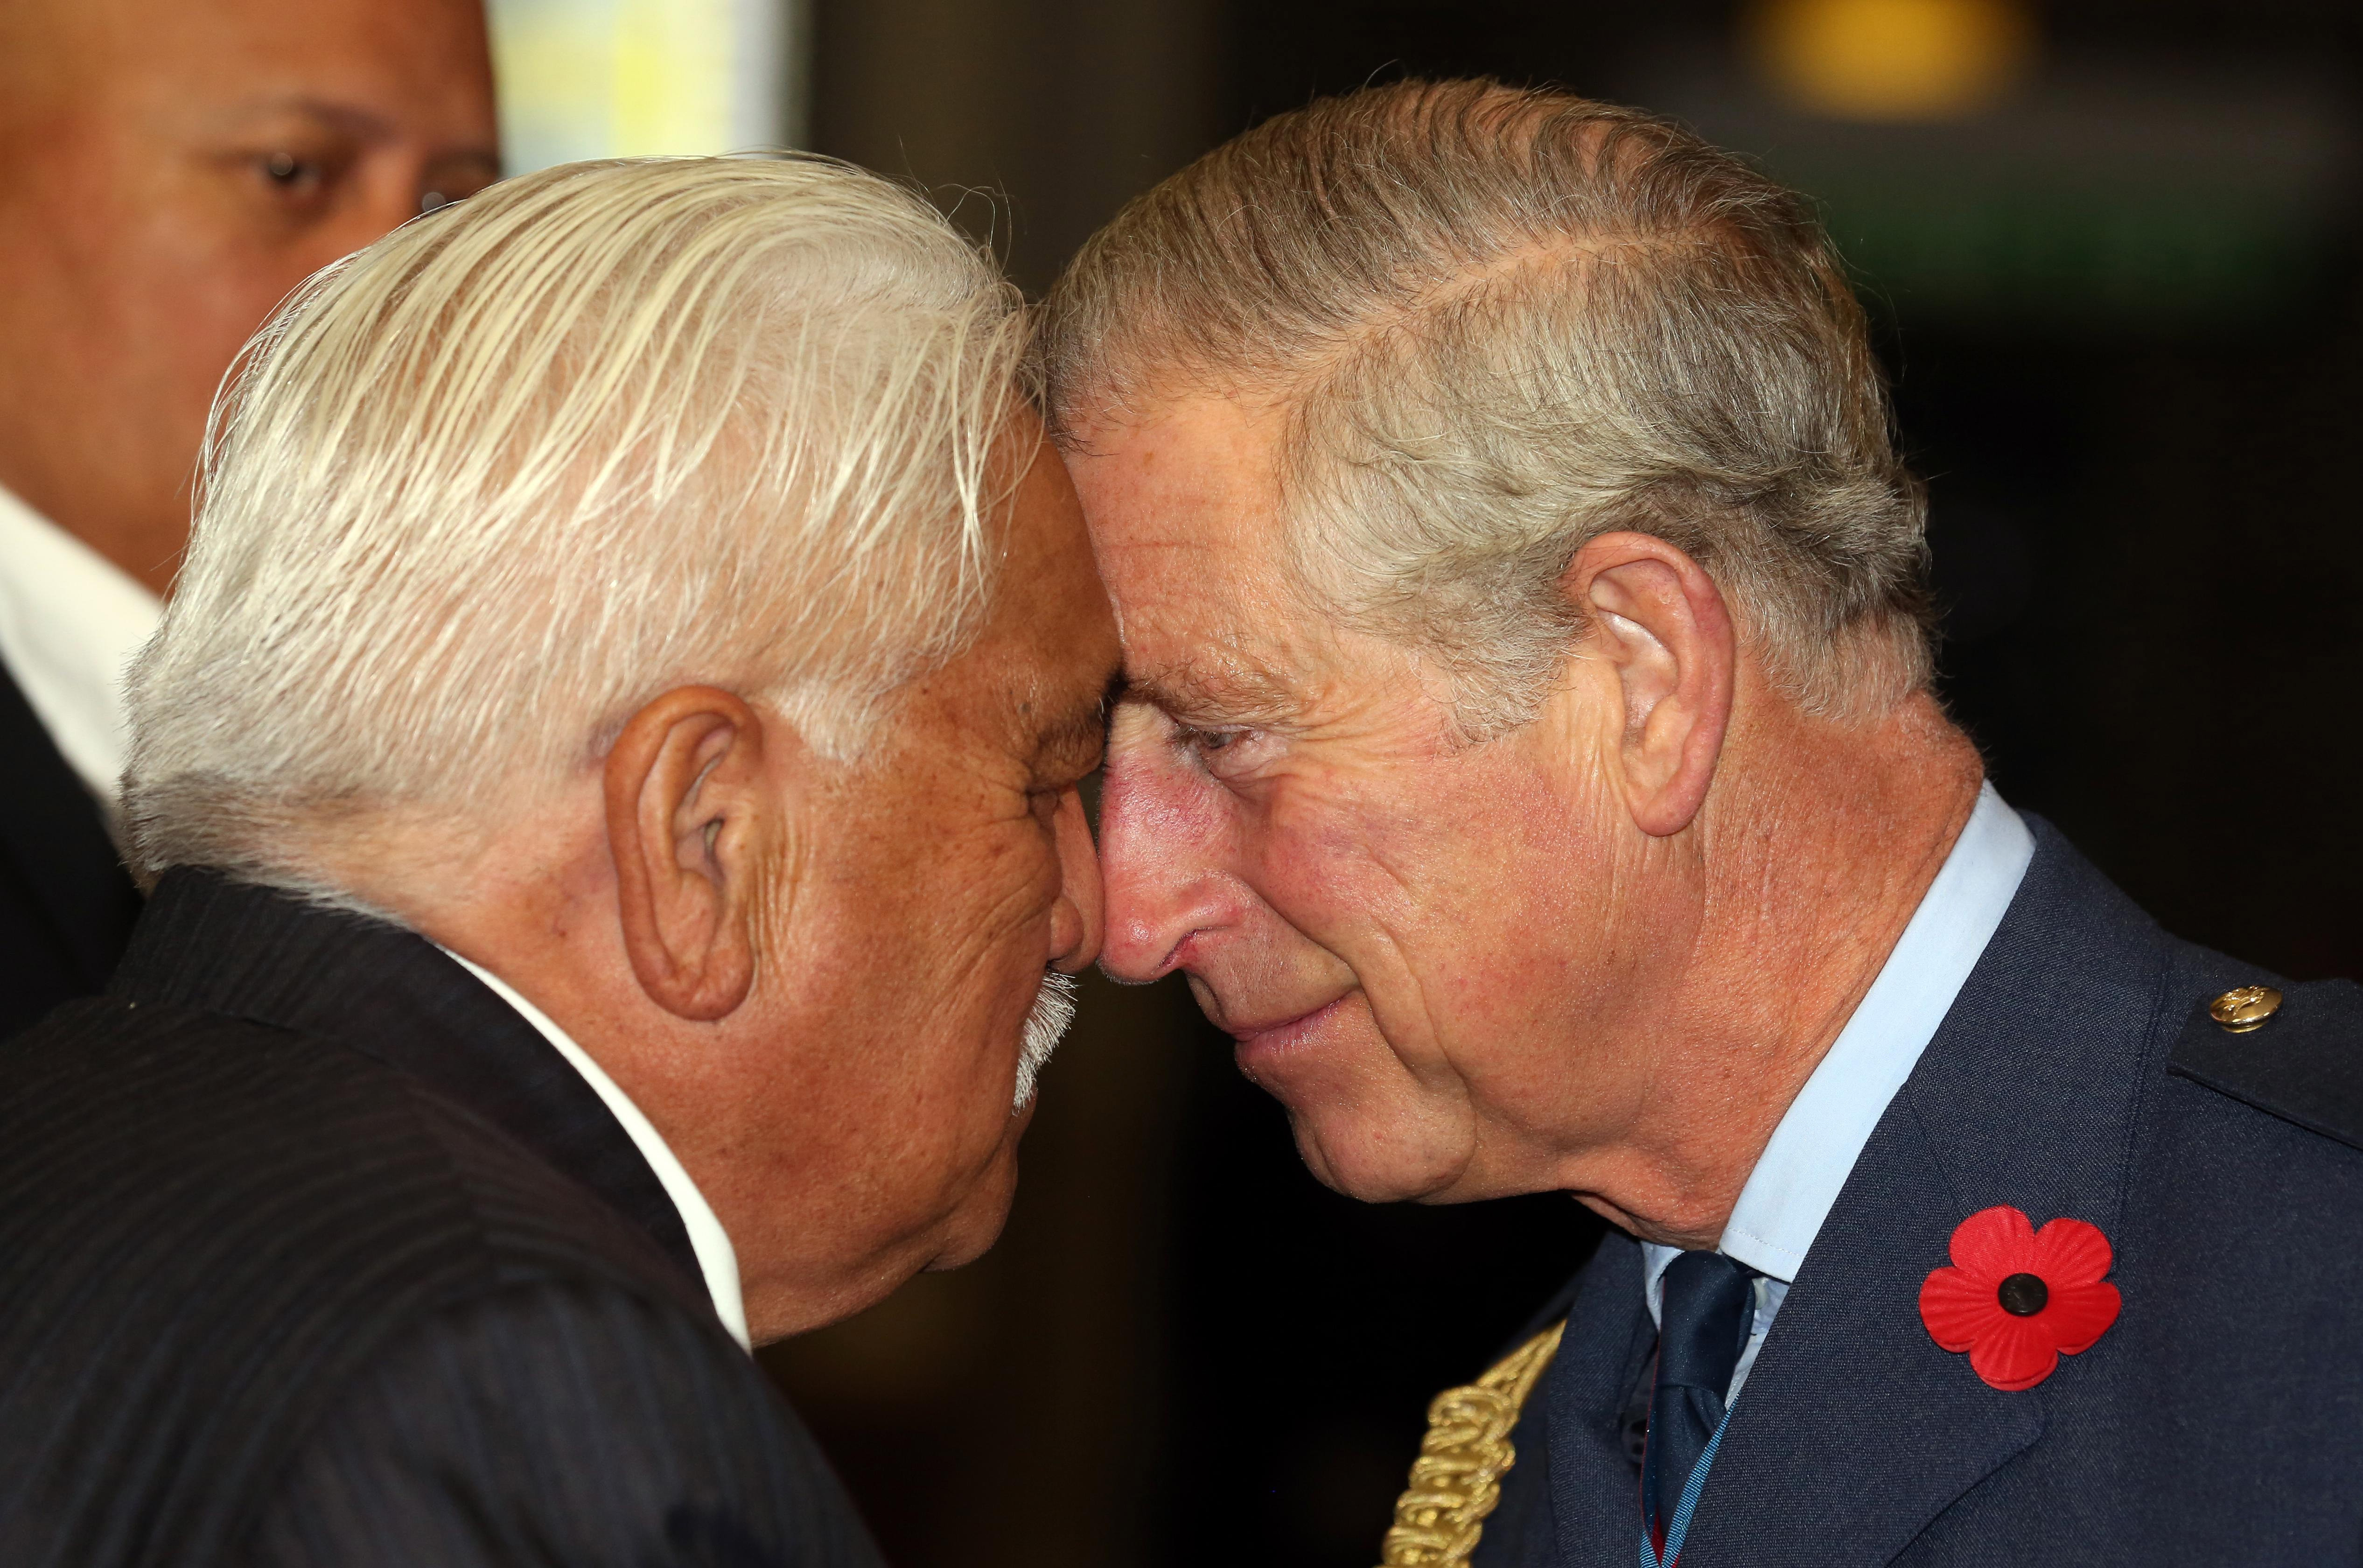 Charles is greeted with a hongi by Grant Hawke during a welcome ceremony at Auckland War Memorial Museum in New Zealand in 2012